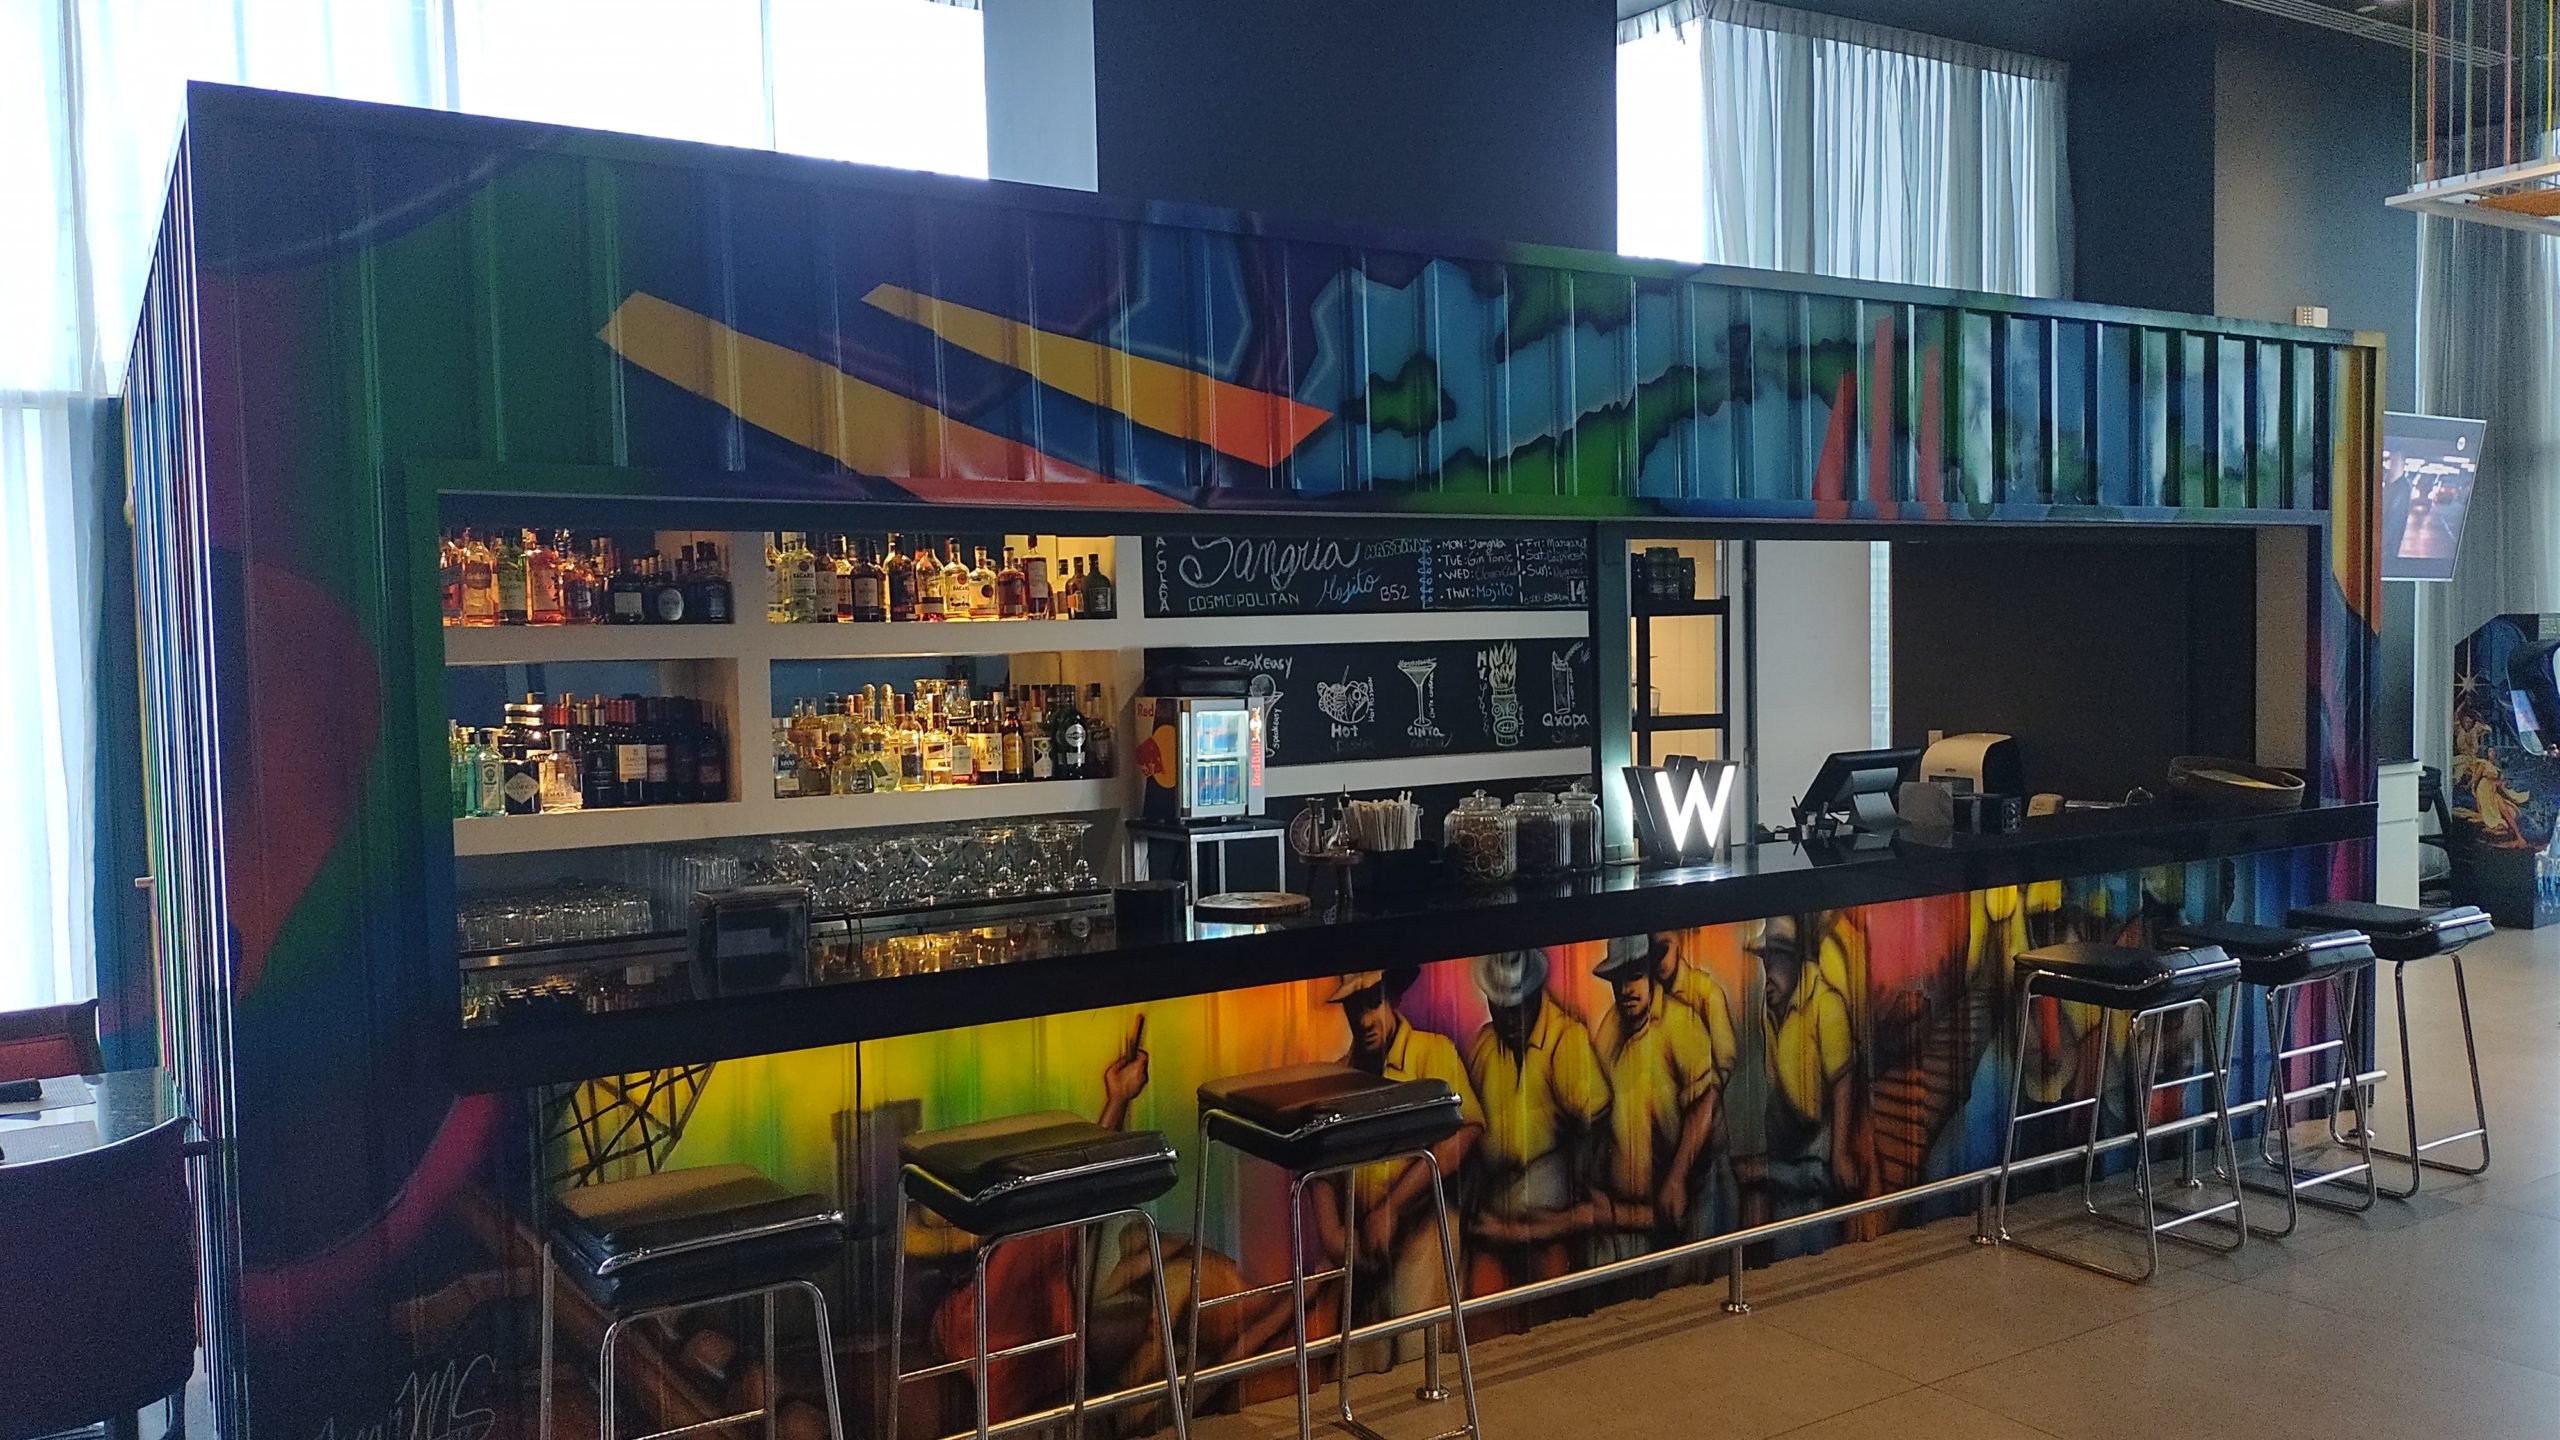 PICTURE OF THE LOBBY BAR WHICH IS MADE FROM OLD SHIPPING CONTAINERS.